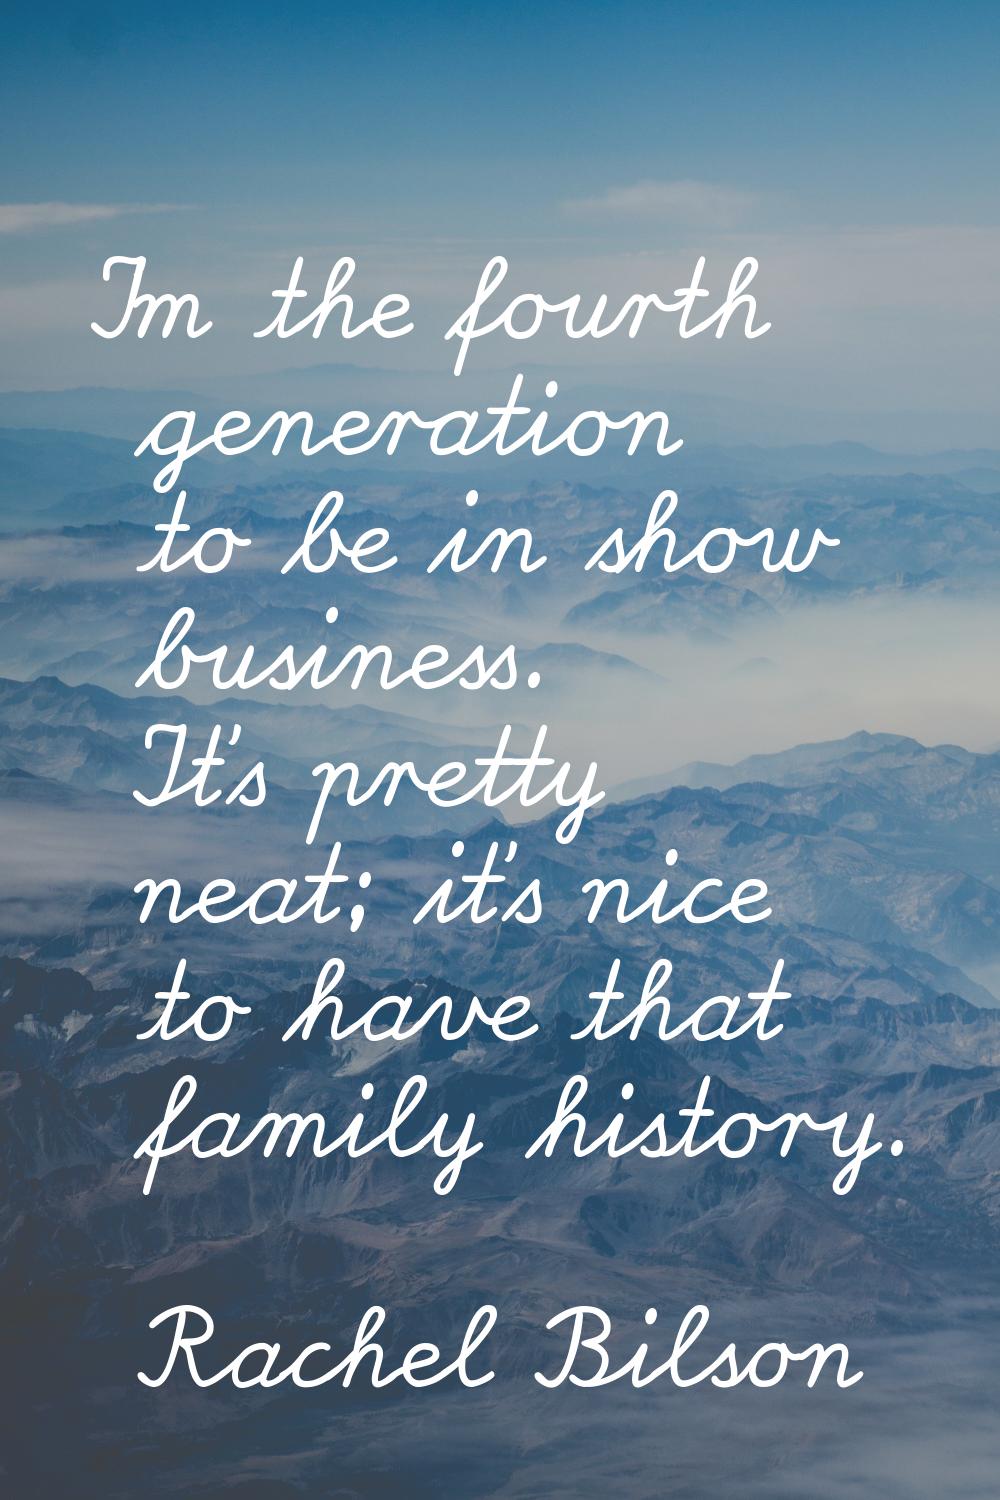 I'm the fourth generation to be in show business. It's pretty neat; it's nice to have that family h